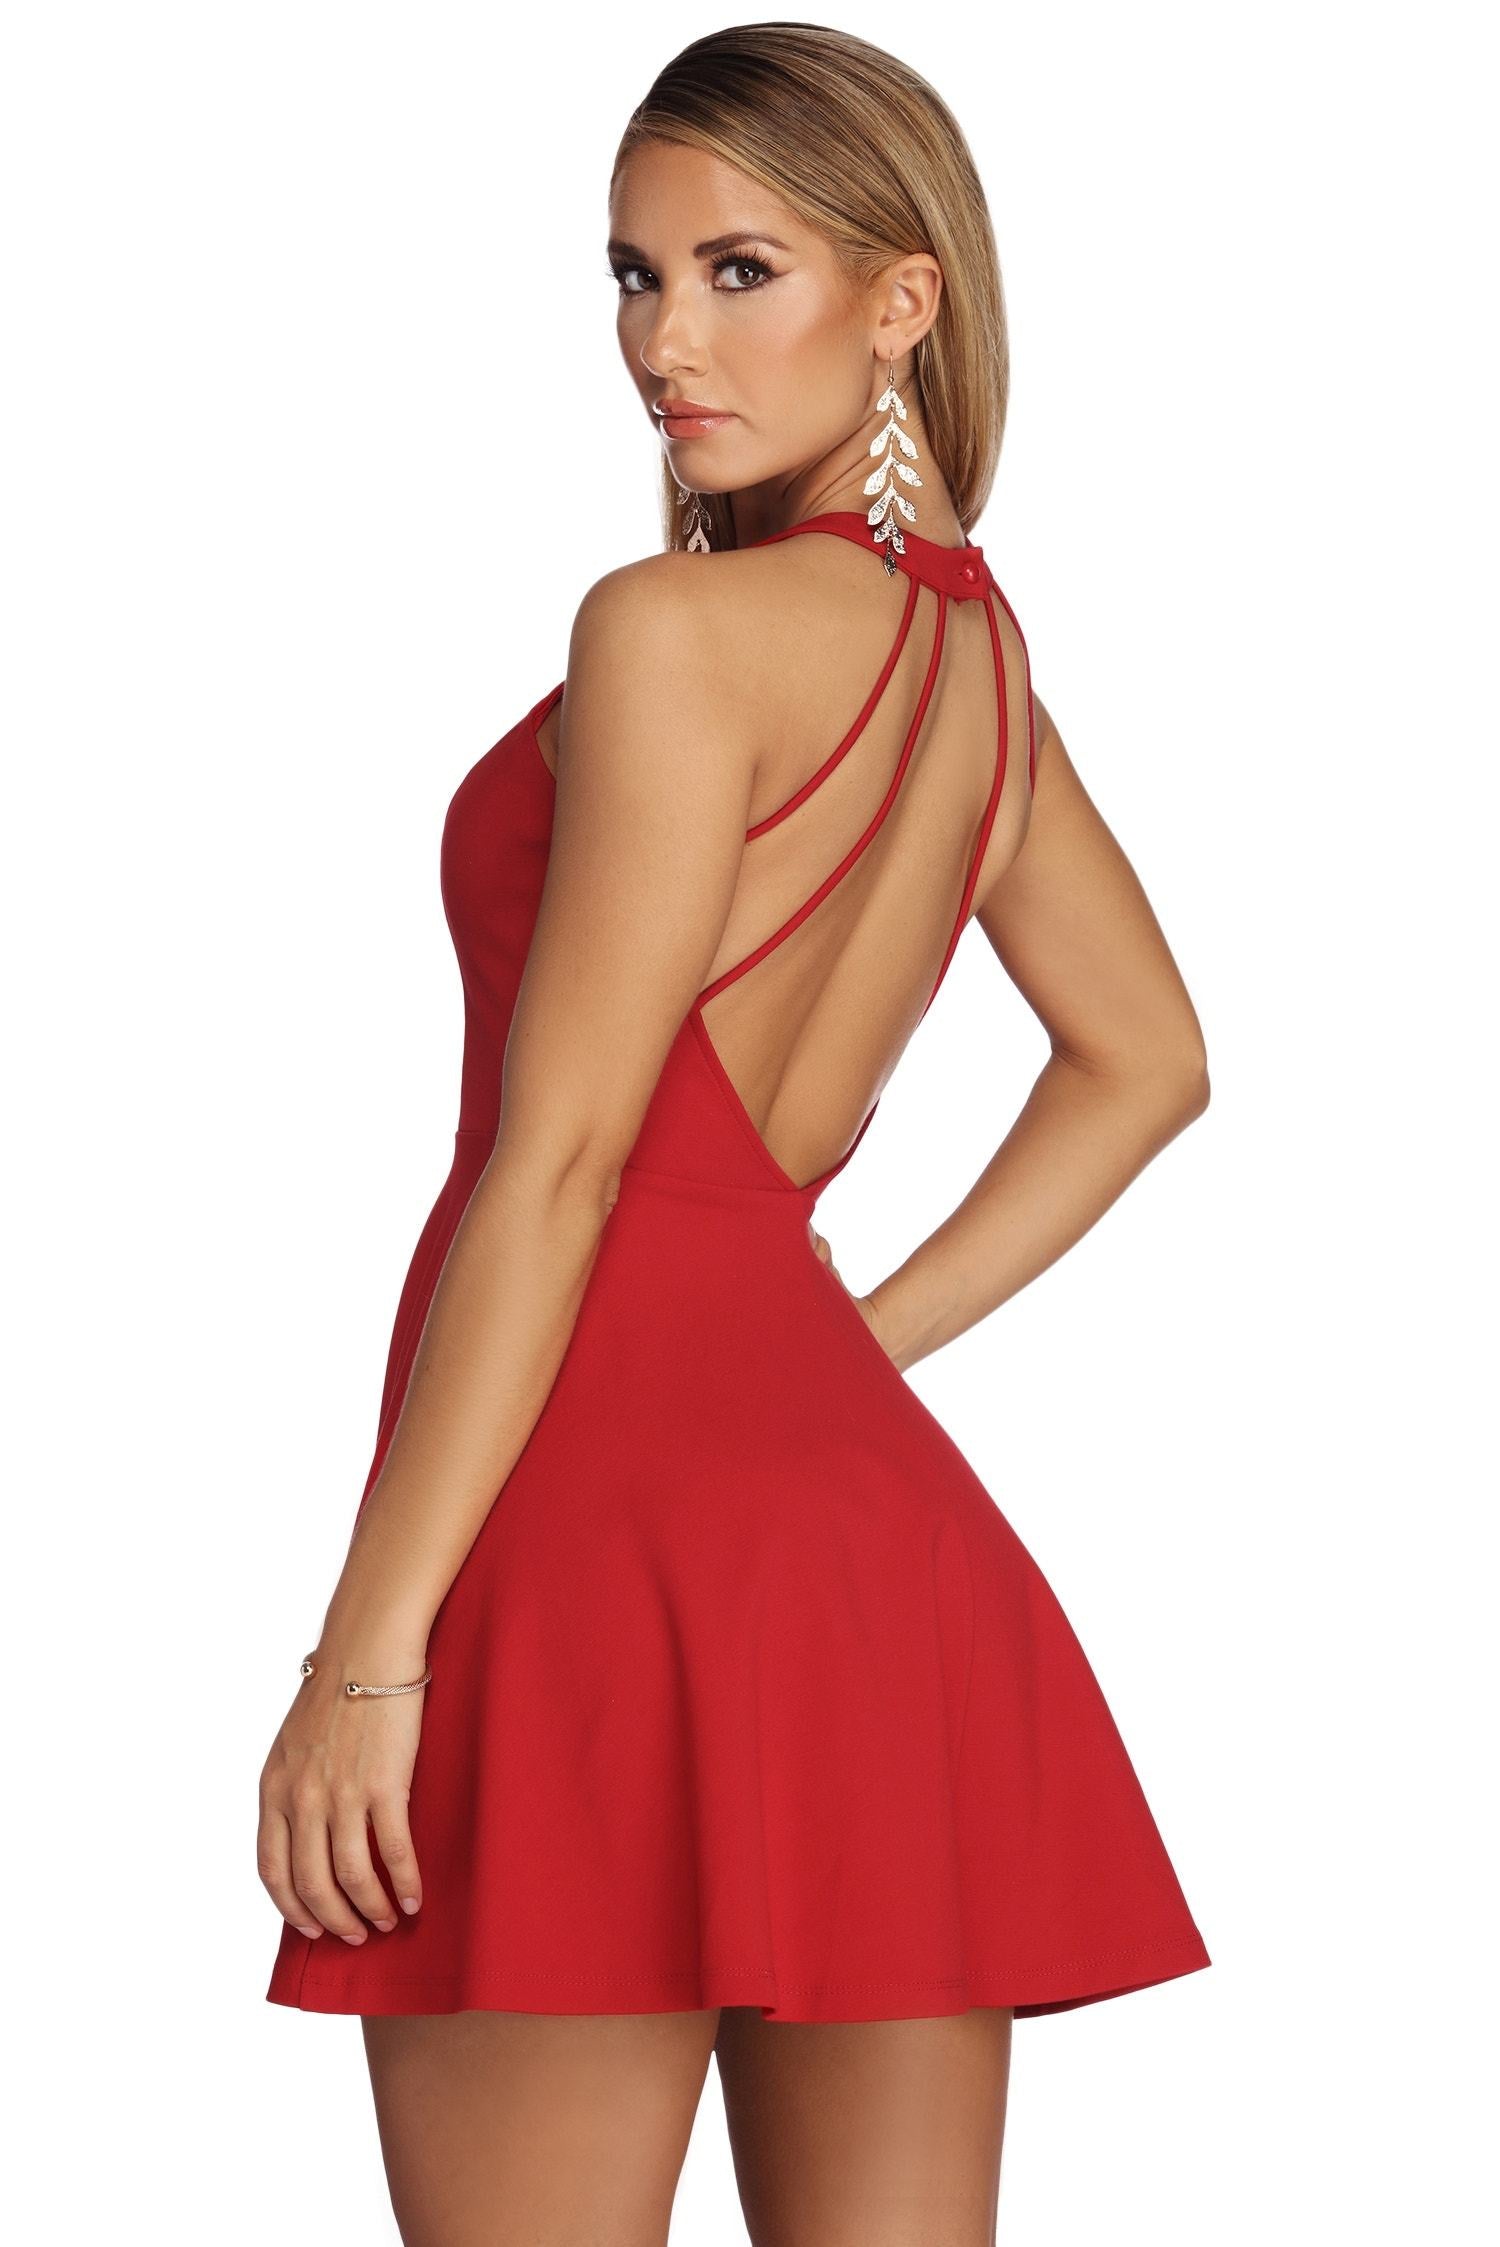 Babe In A Backless Skater Dress - Lady Occasions